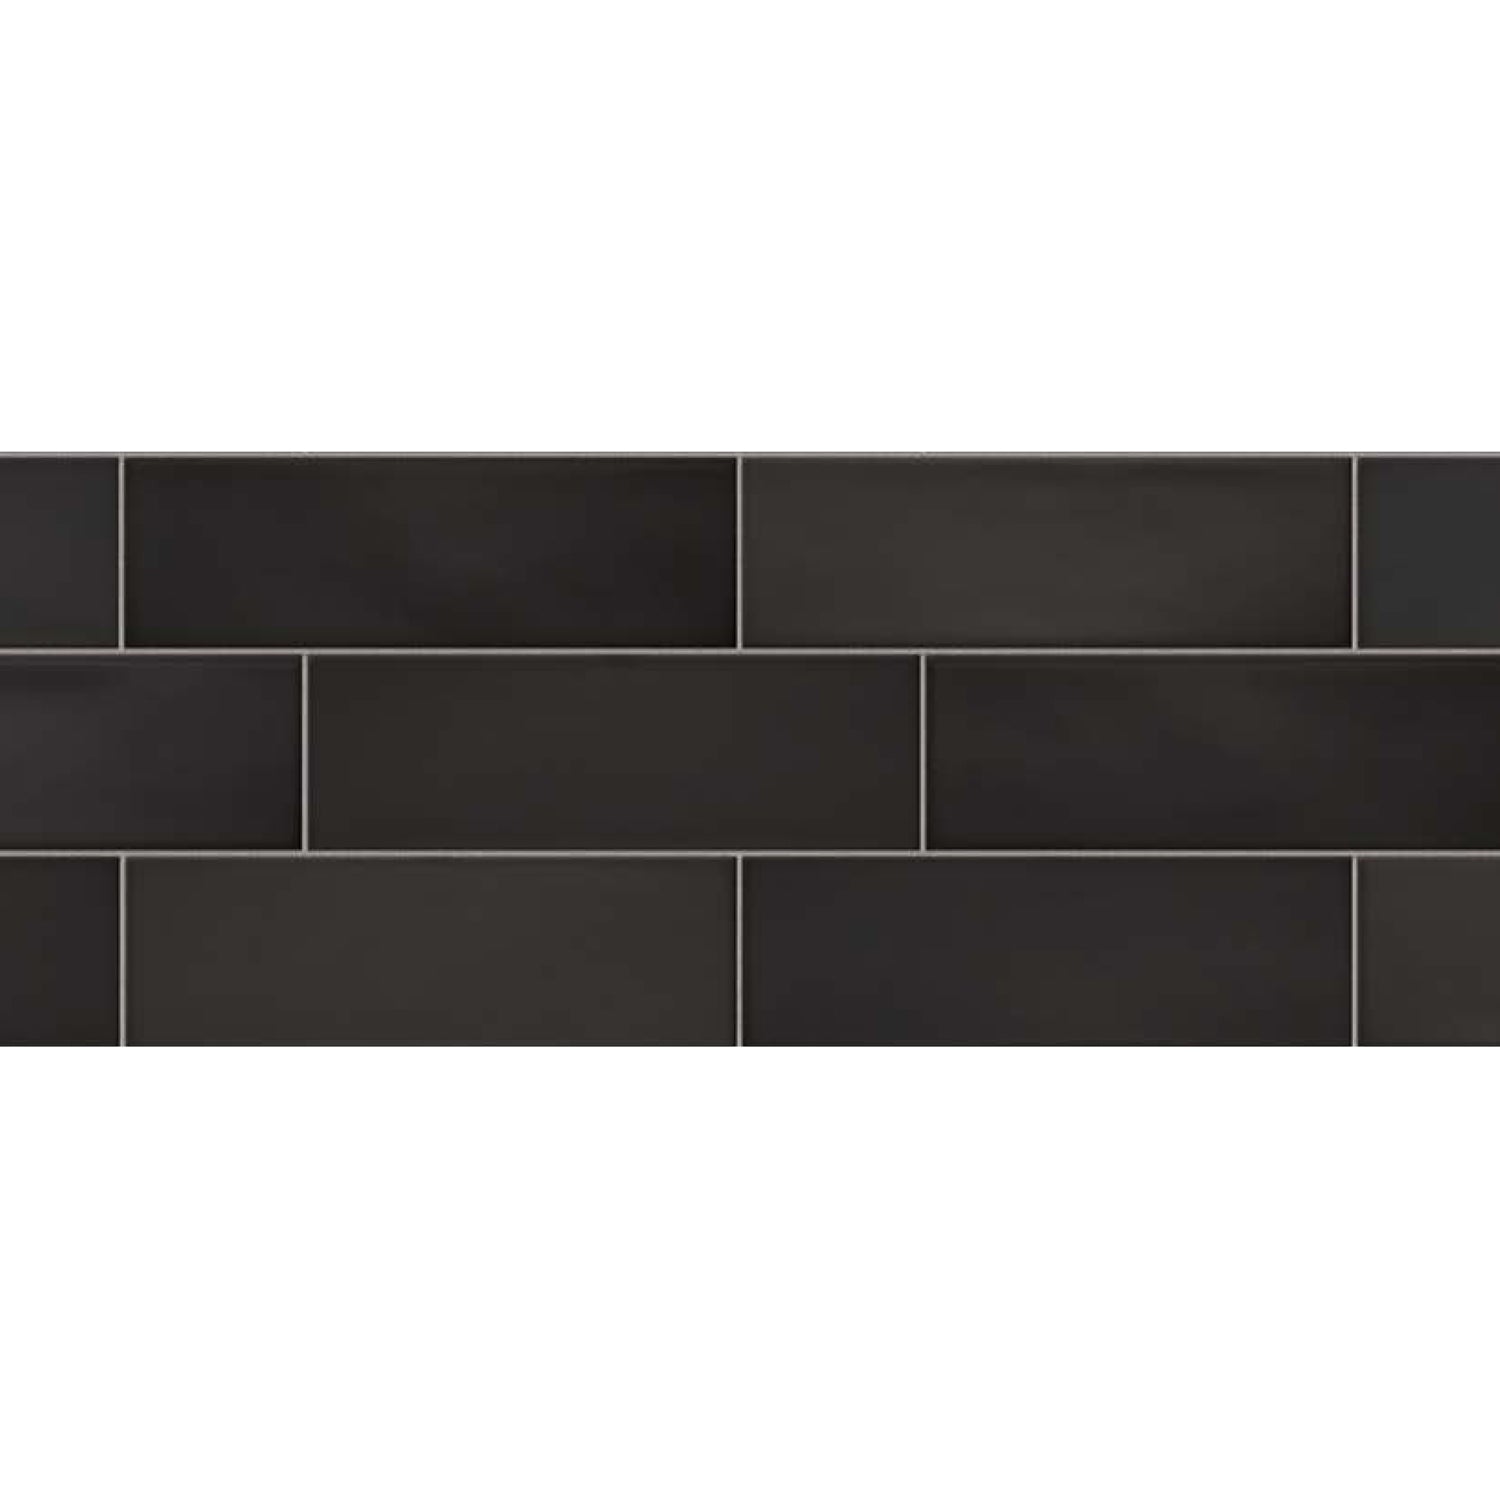 Topcu - Chalky - 2.5 in. x 8 in. Ceramic Wall Tile - Graphite